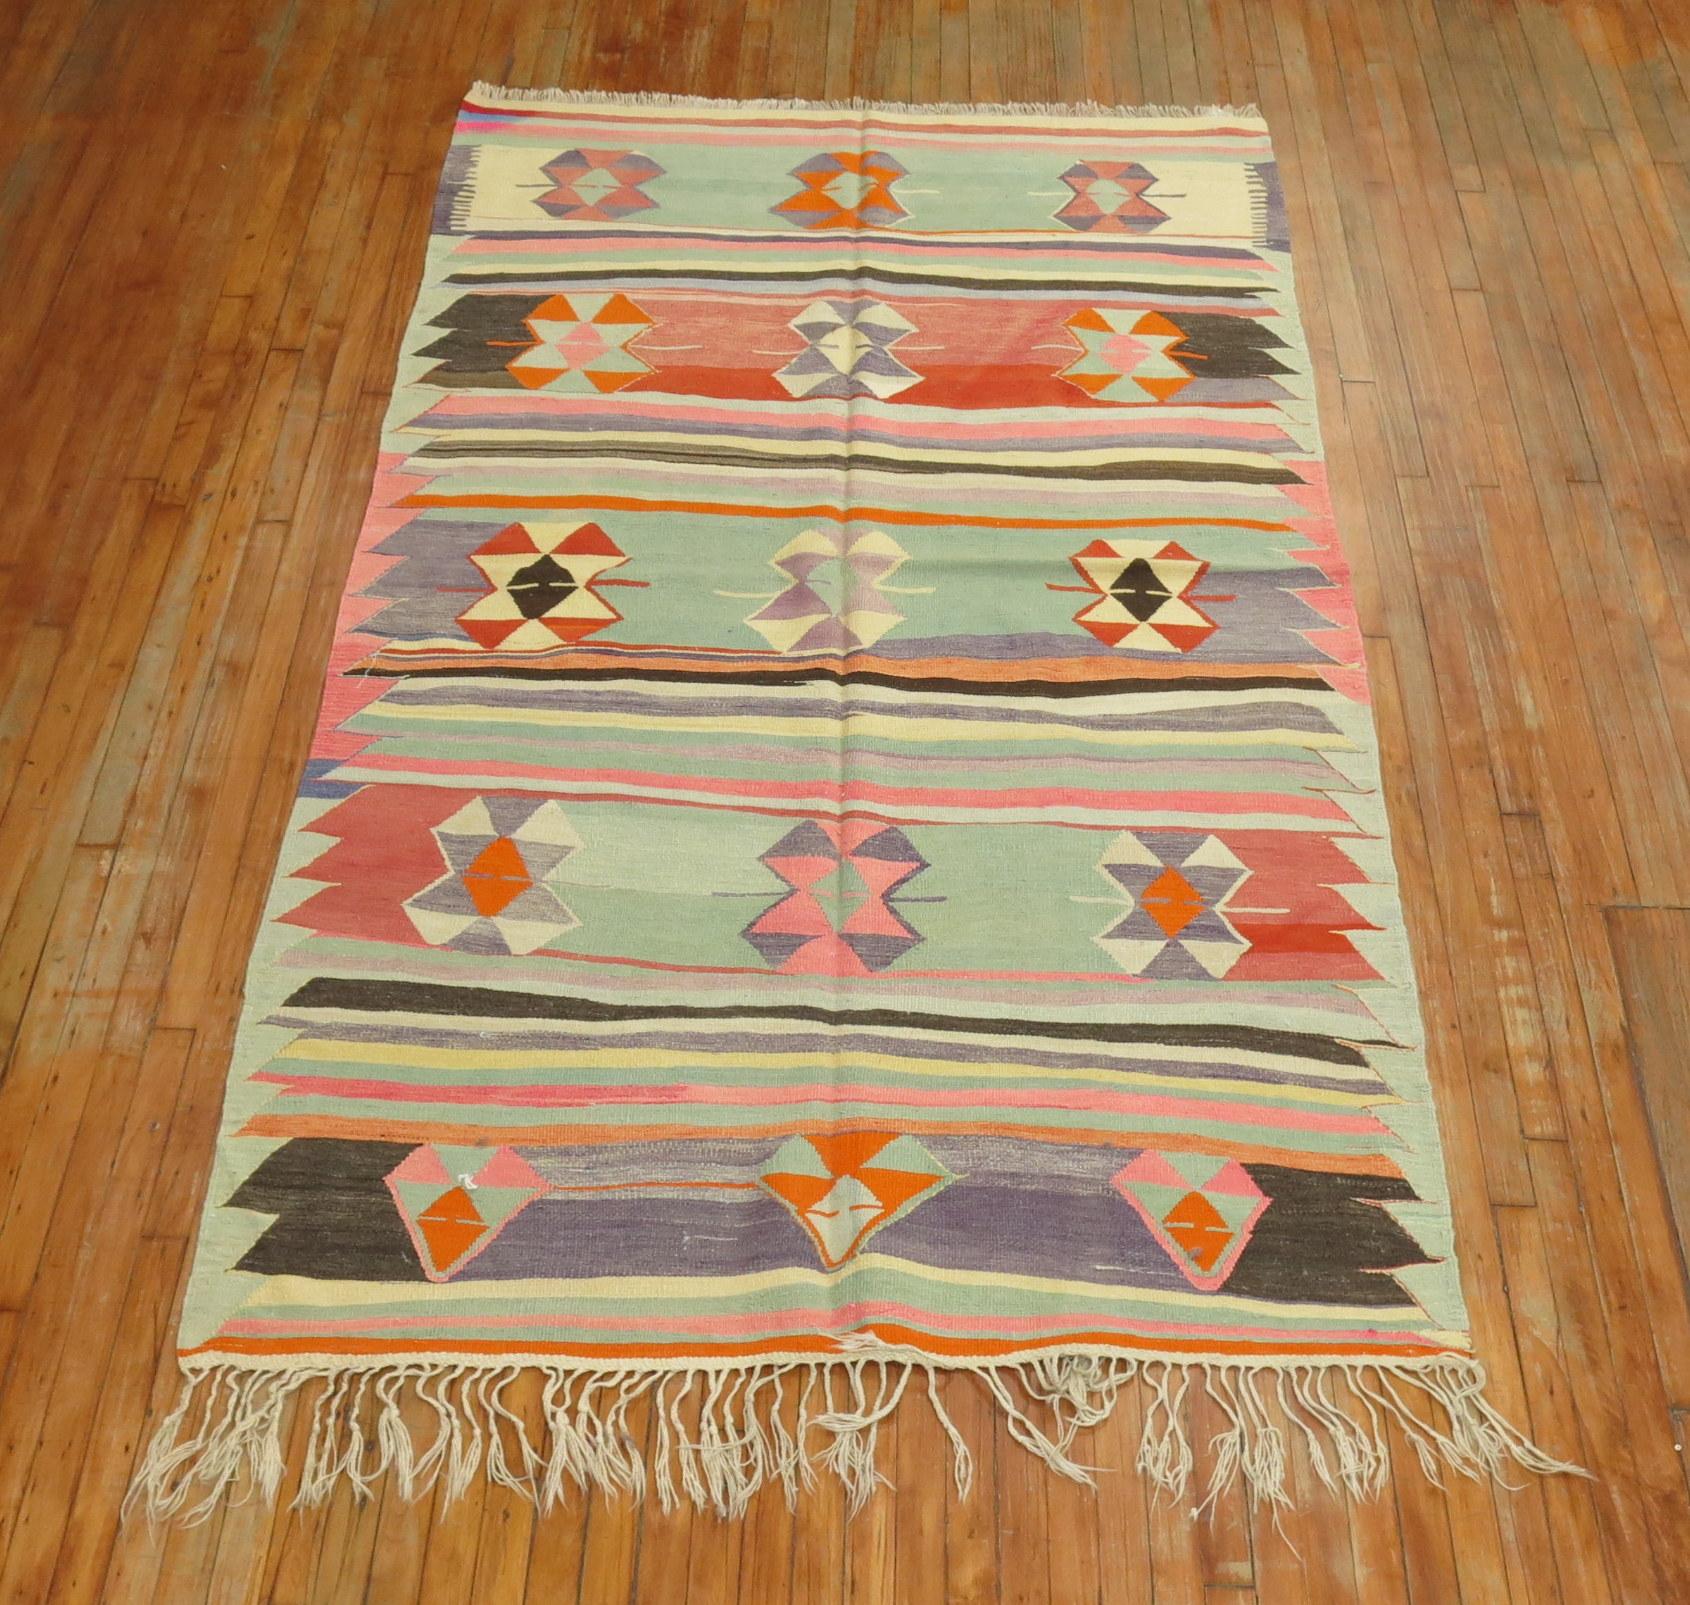 Boho chic mid-20th century Turkish Kilim highlighted by a pistachio green color.
Bohemian boho!

Measures: 5